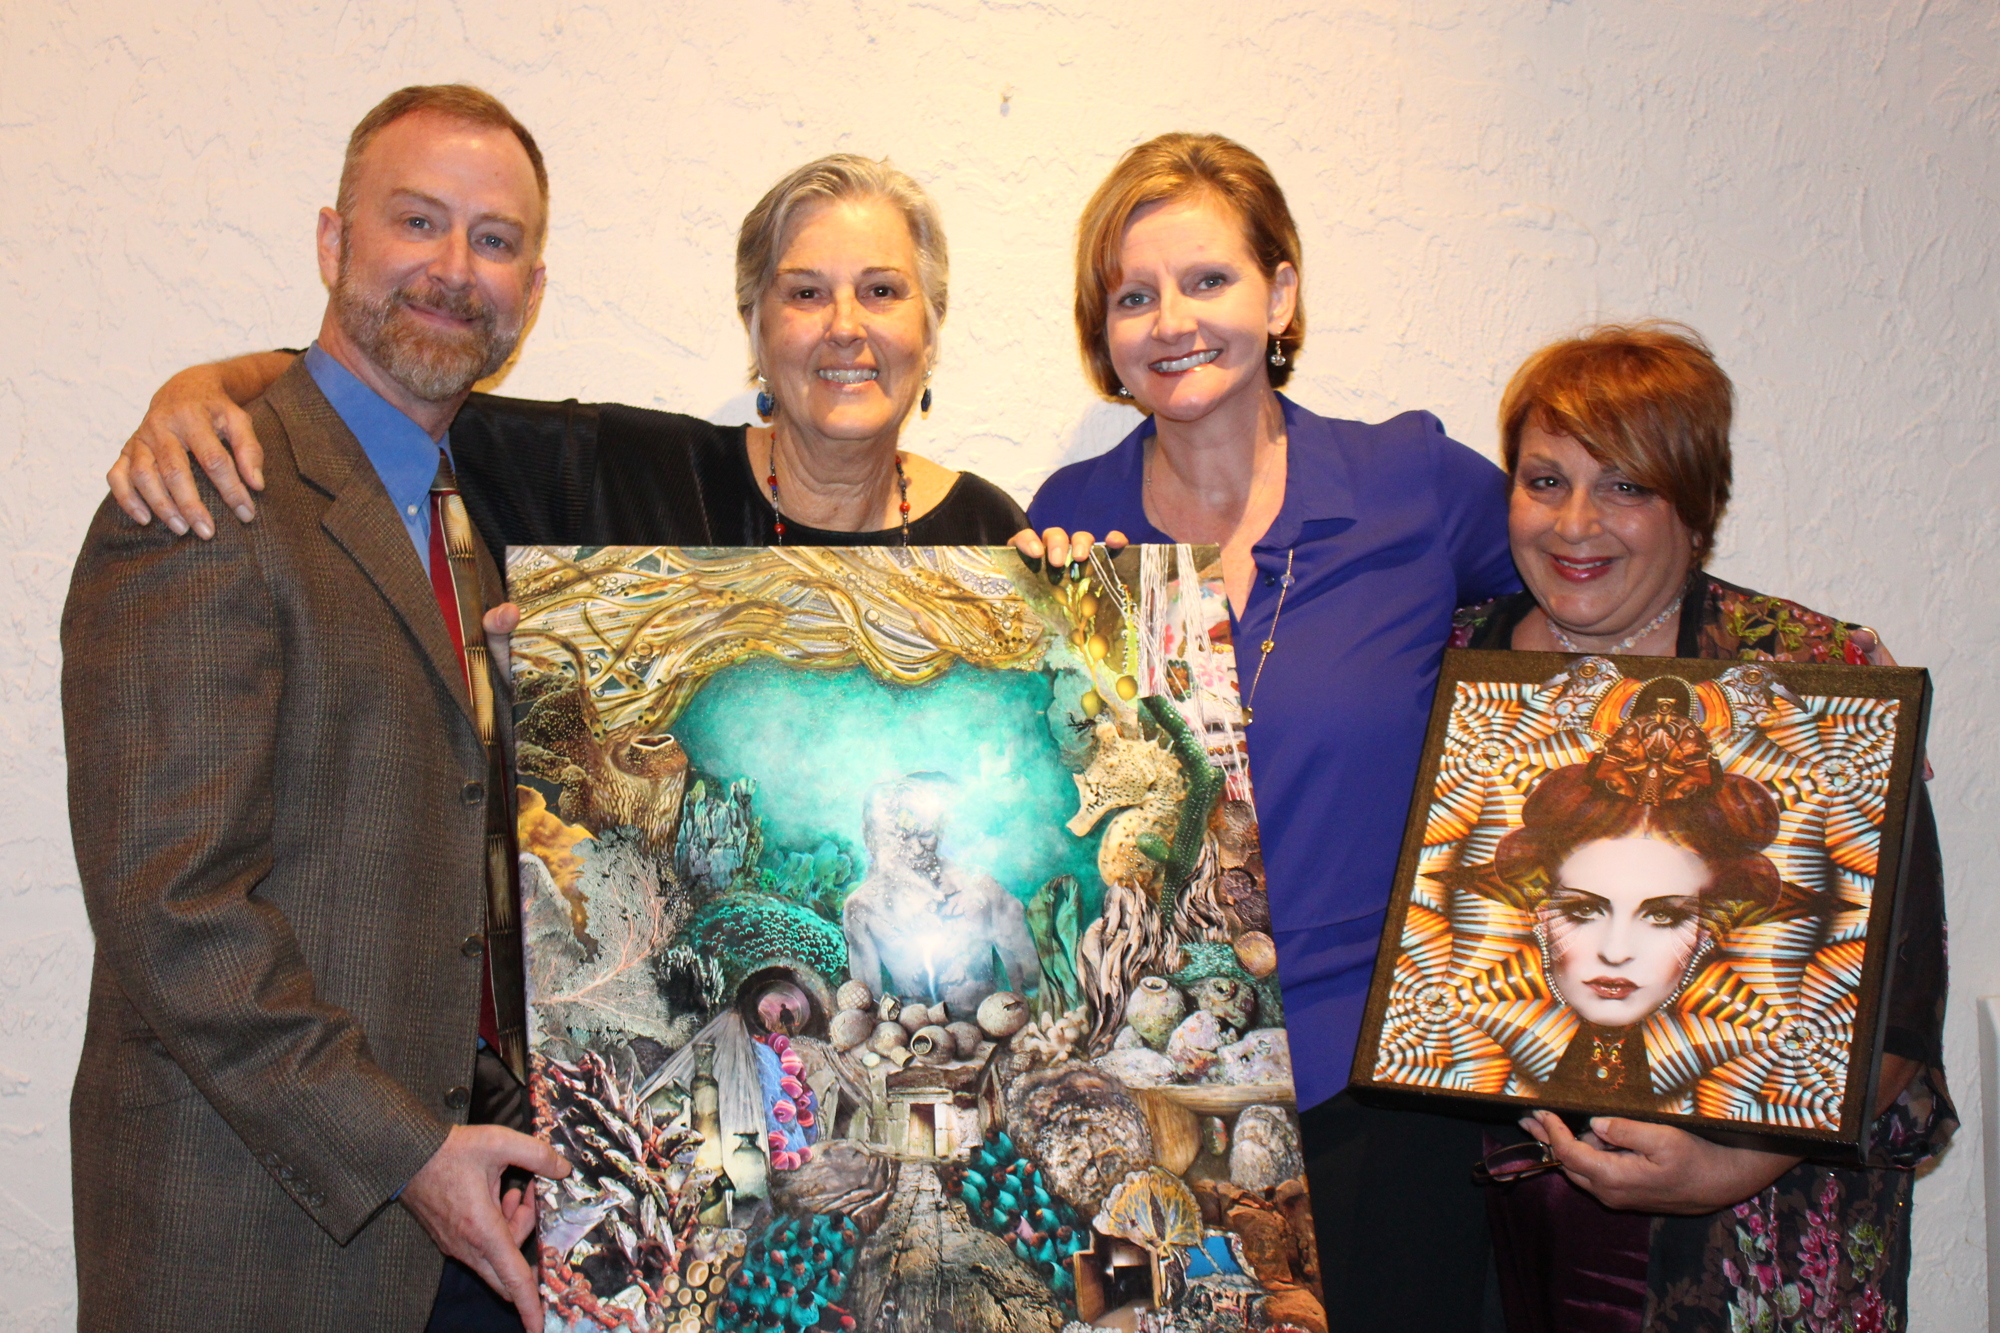 Jeffery Kin, artistic director of the Players Centre for Performing Arts, Katya De Luisa, Robyn Faucy, of the Neuro Challenge Foundation, and Elisabeth Trostli. Above: “Last Train” is indicative of De Luisa’s collage-based work.